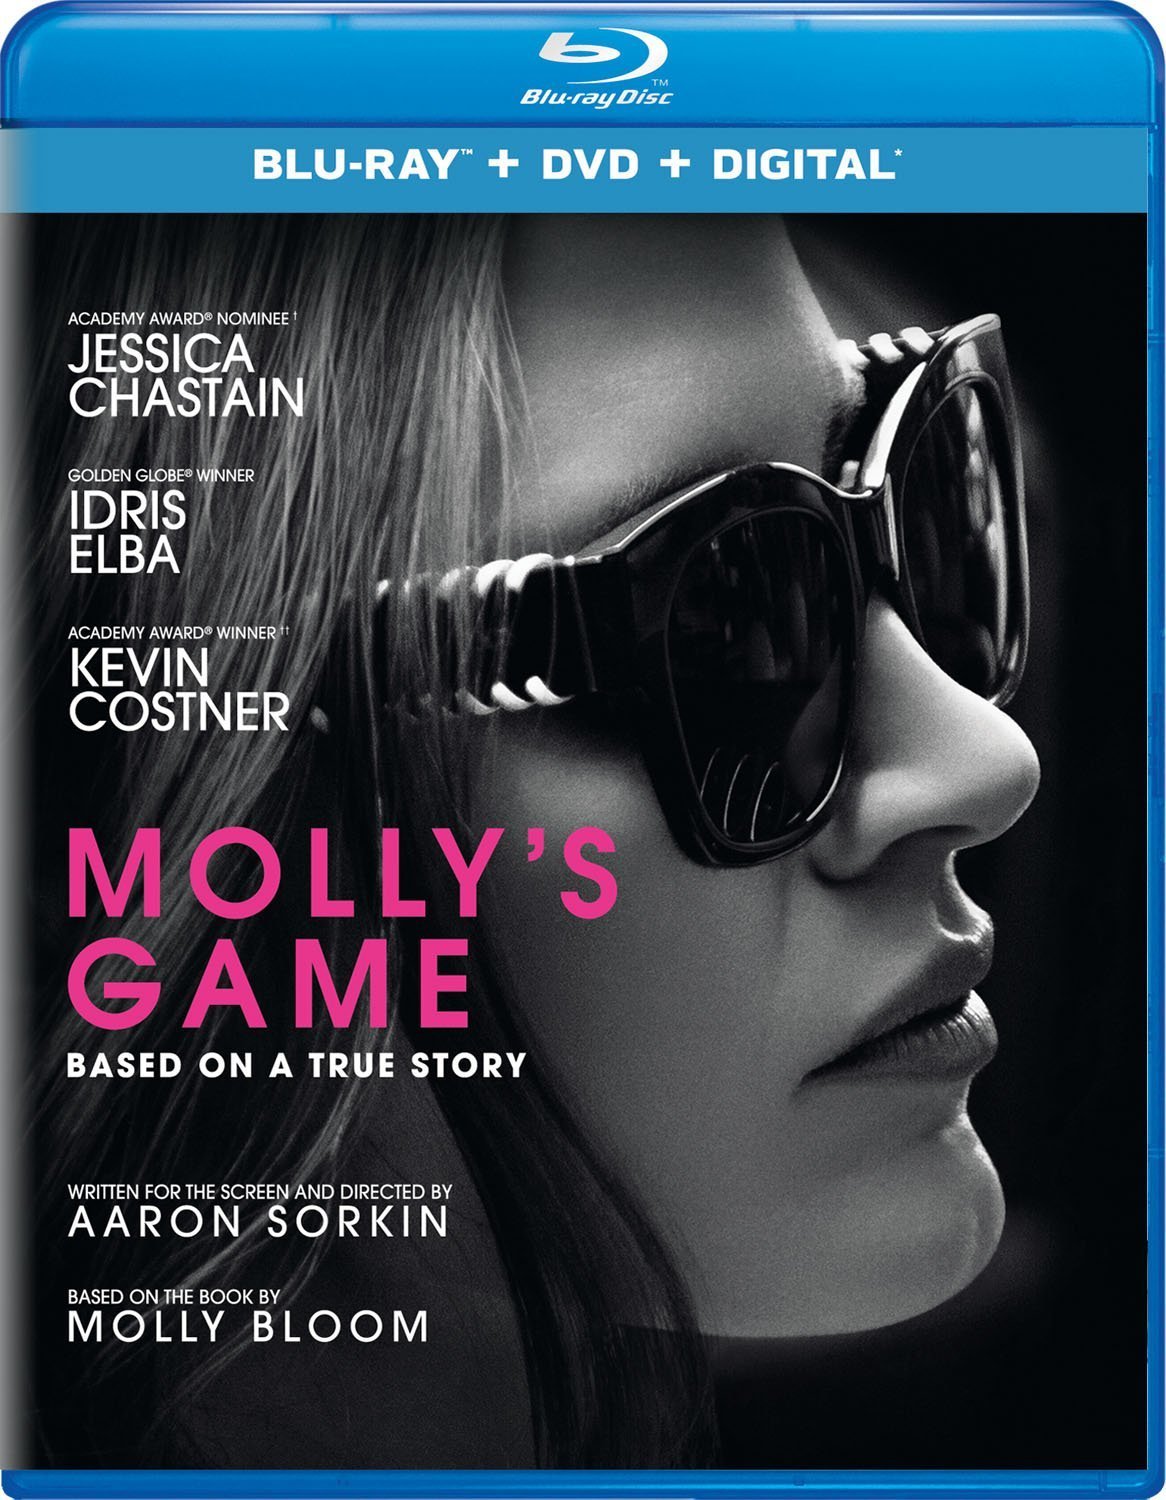 game - Molly's Game (2017) Apuesta Maestra (2017) [DTS 5.1 + SUP] [Blu Ray-Rip] 195961_front